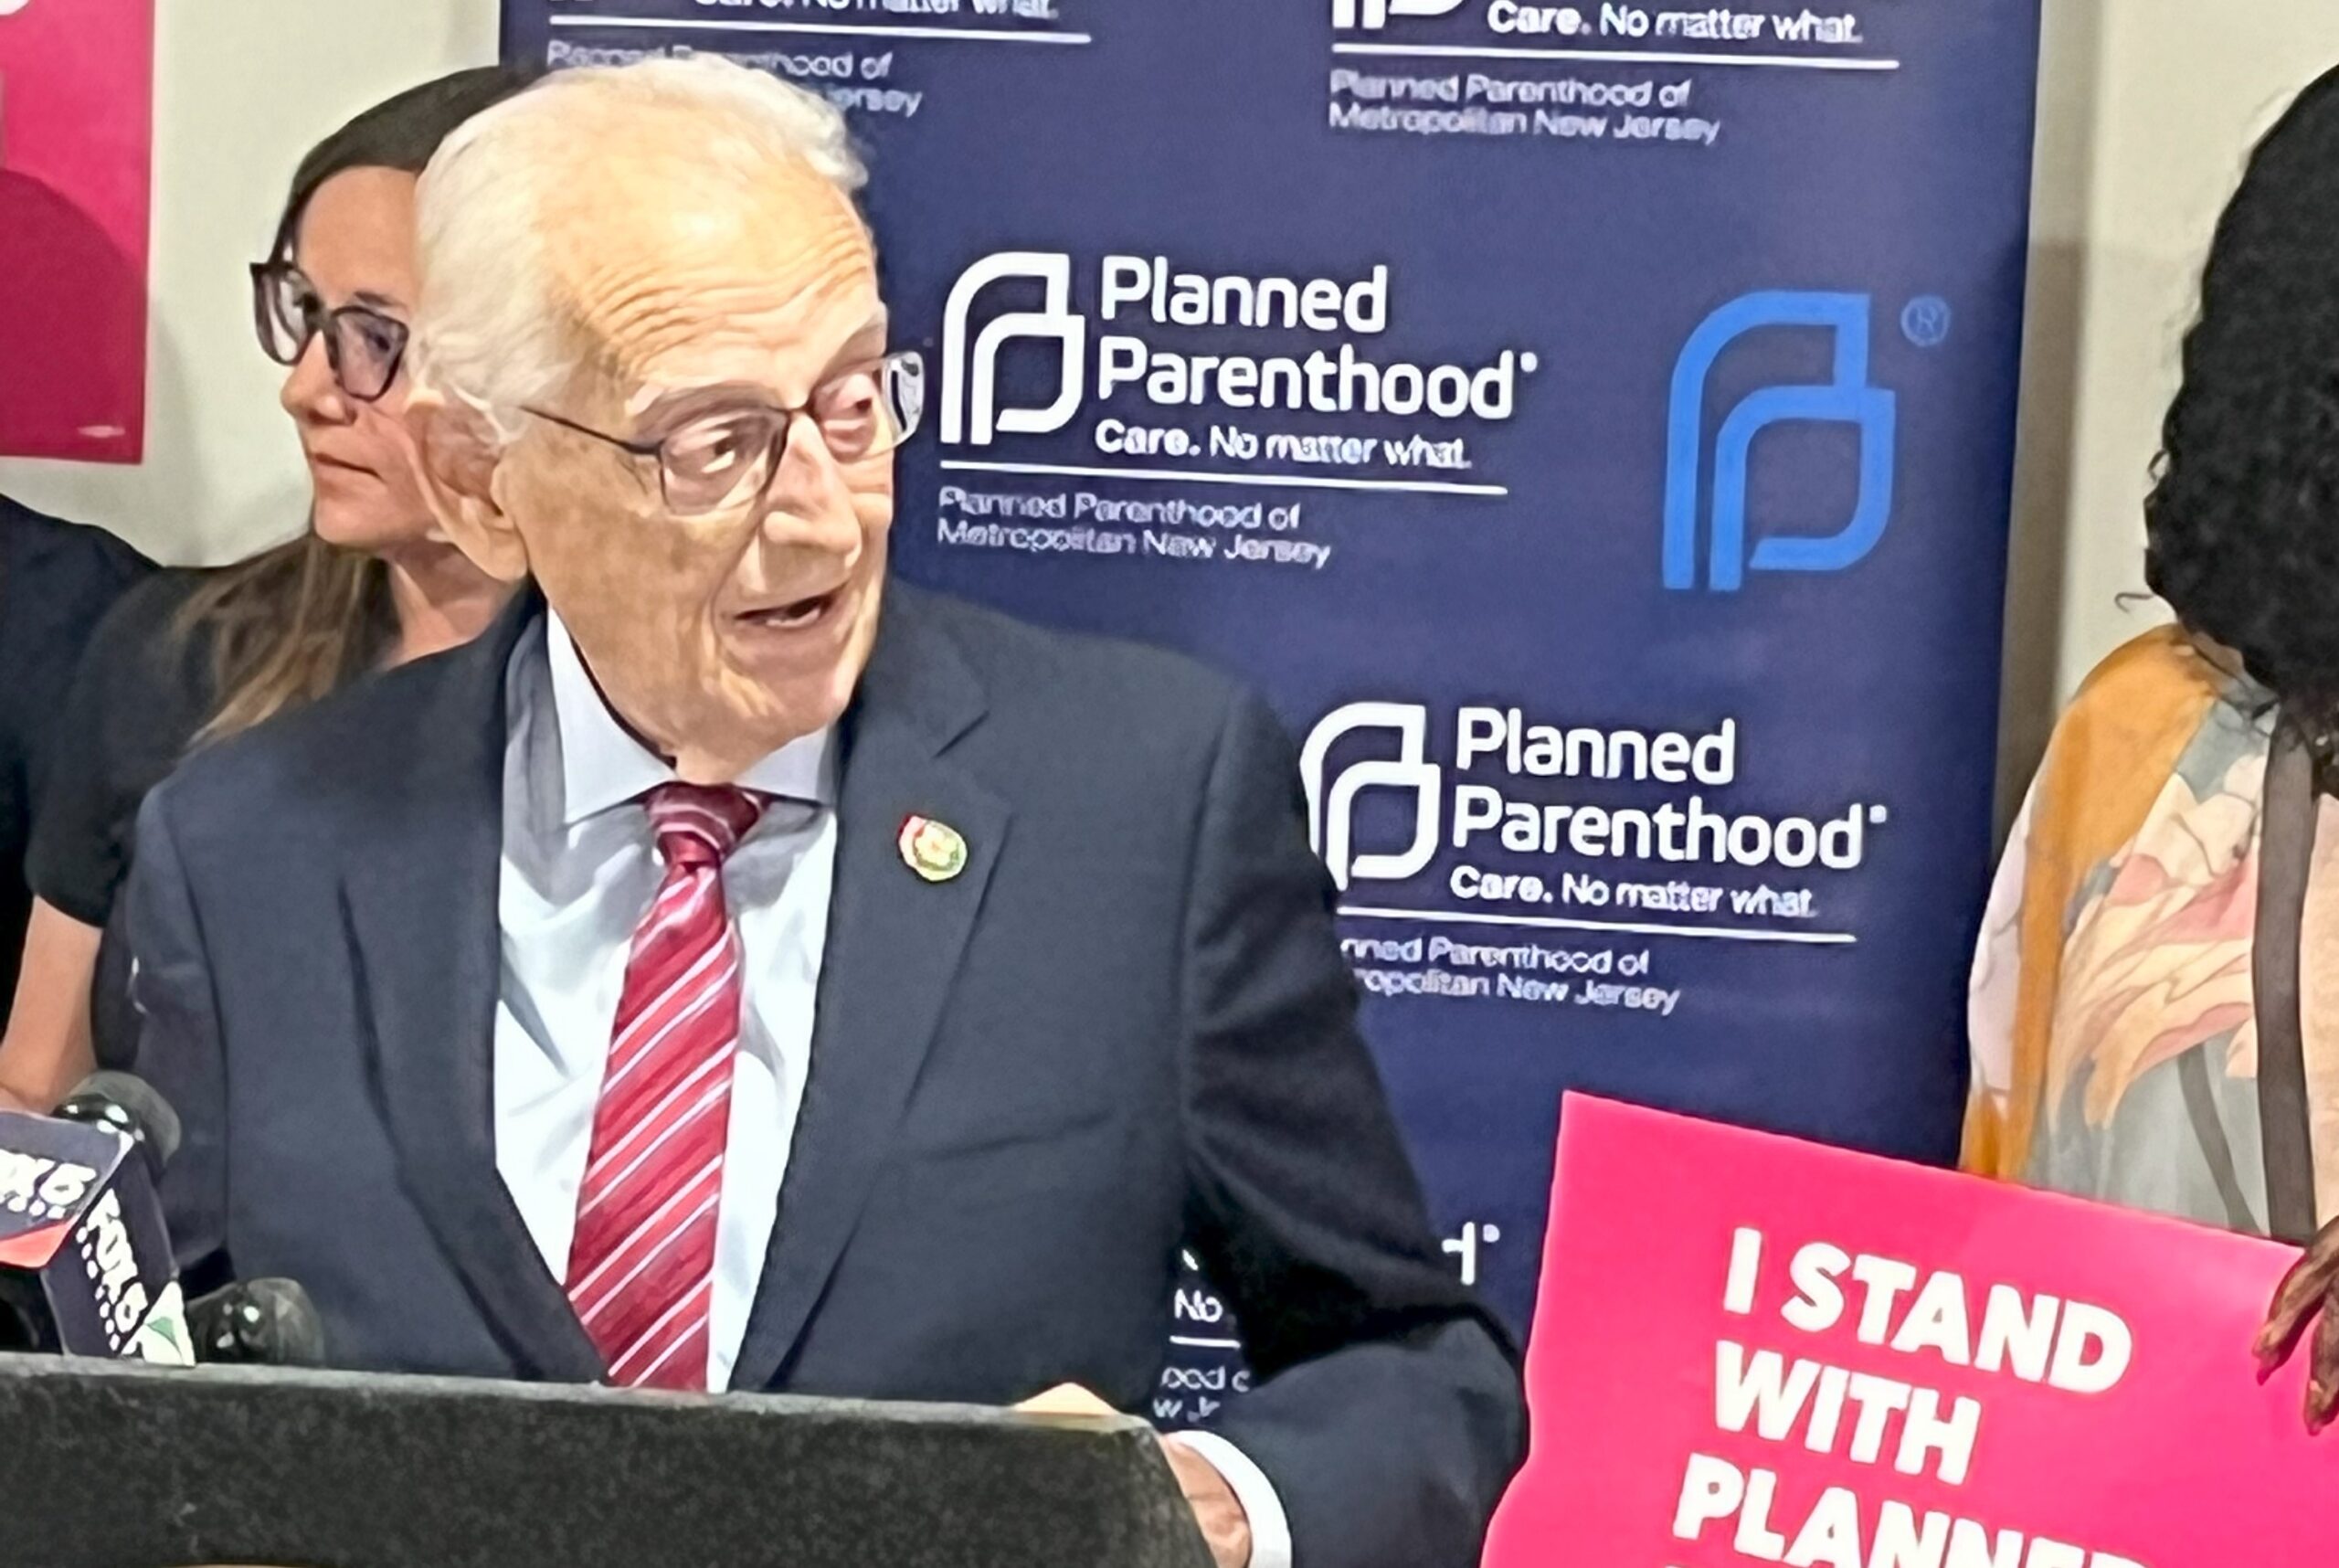 Pascrell highlights the potential threat to American tax law foundation posed by the Moore case, according to Insider NJ.